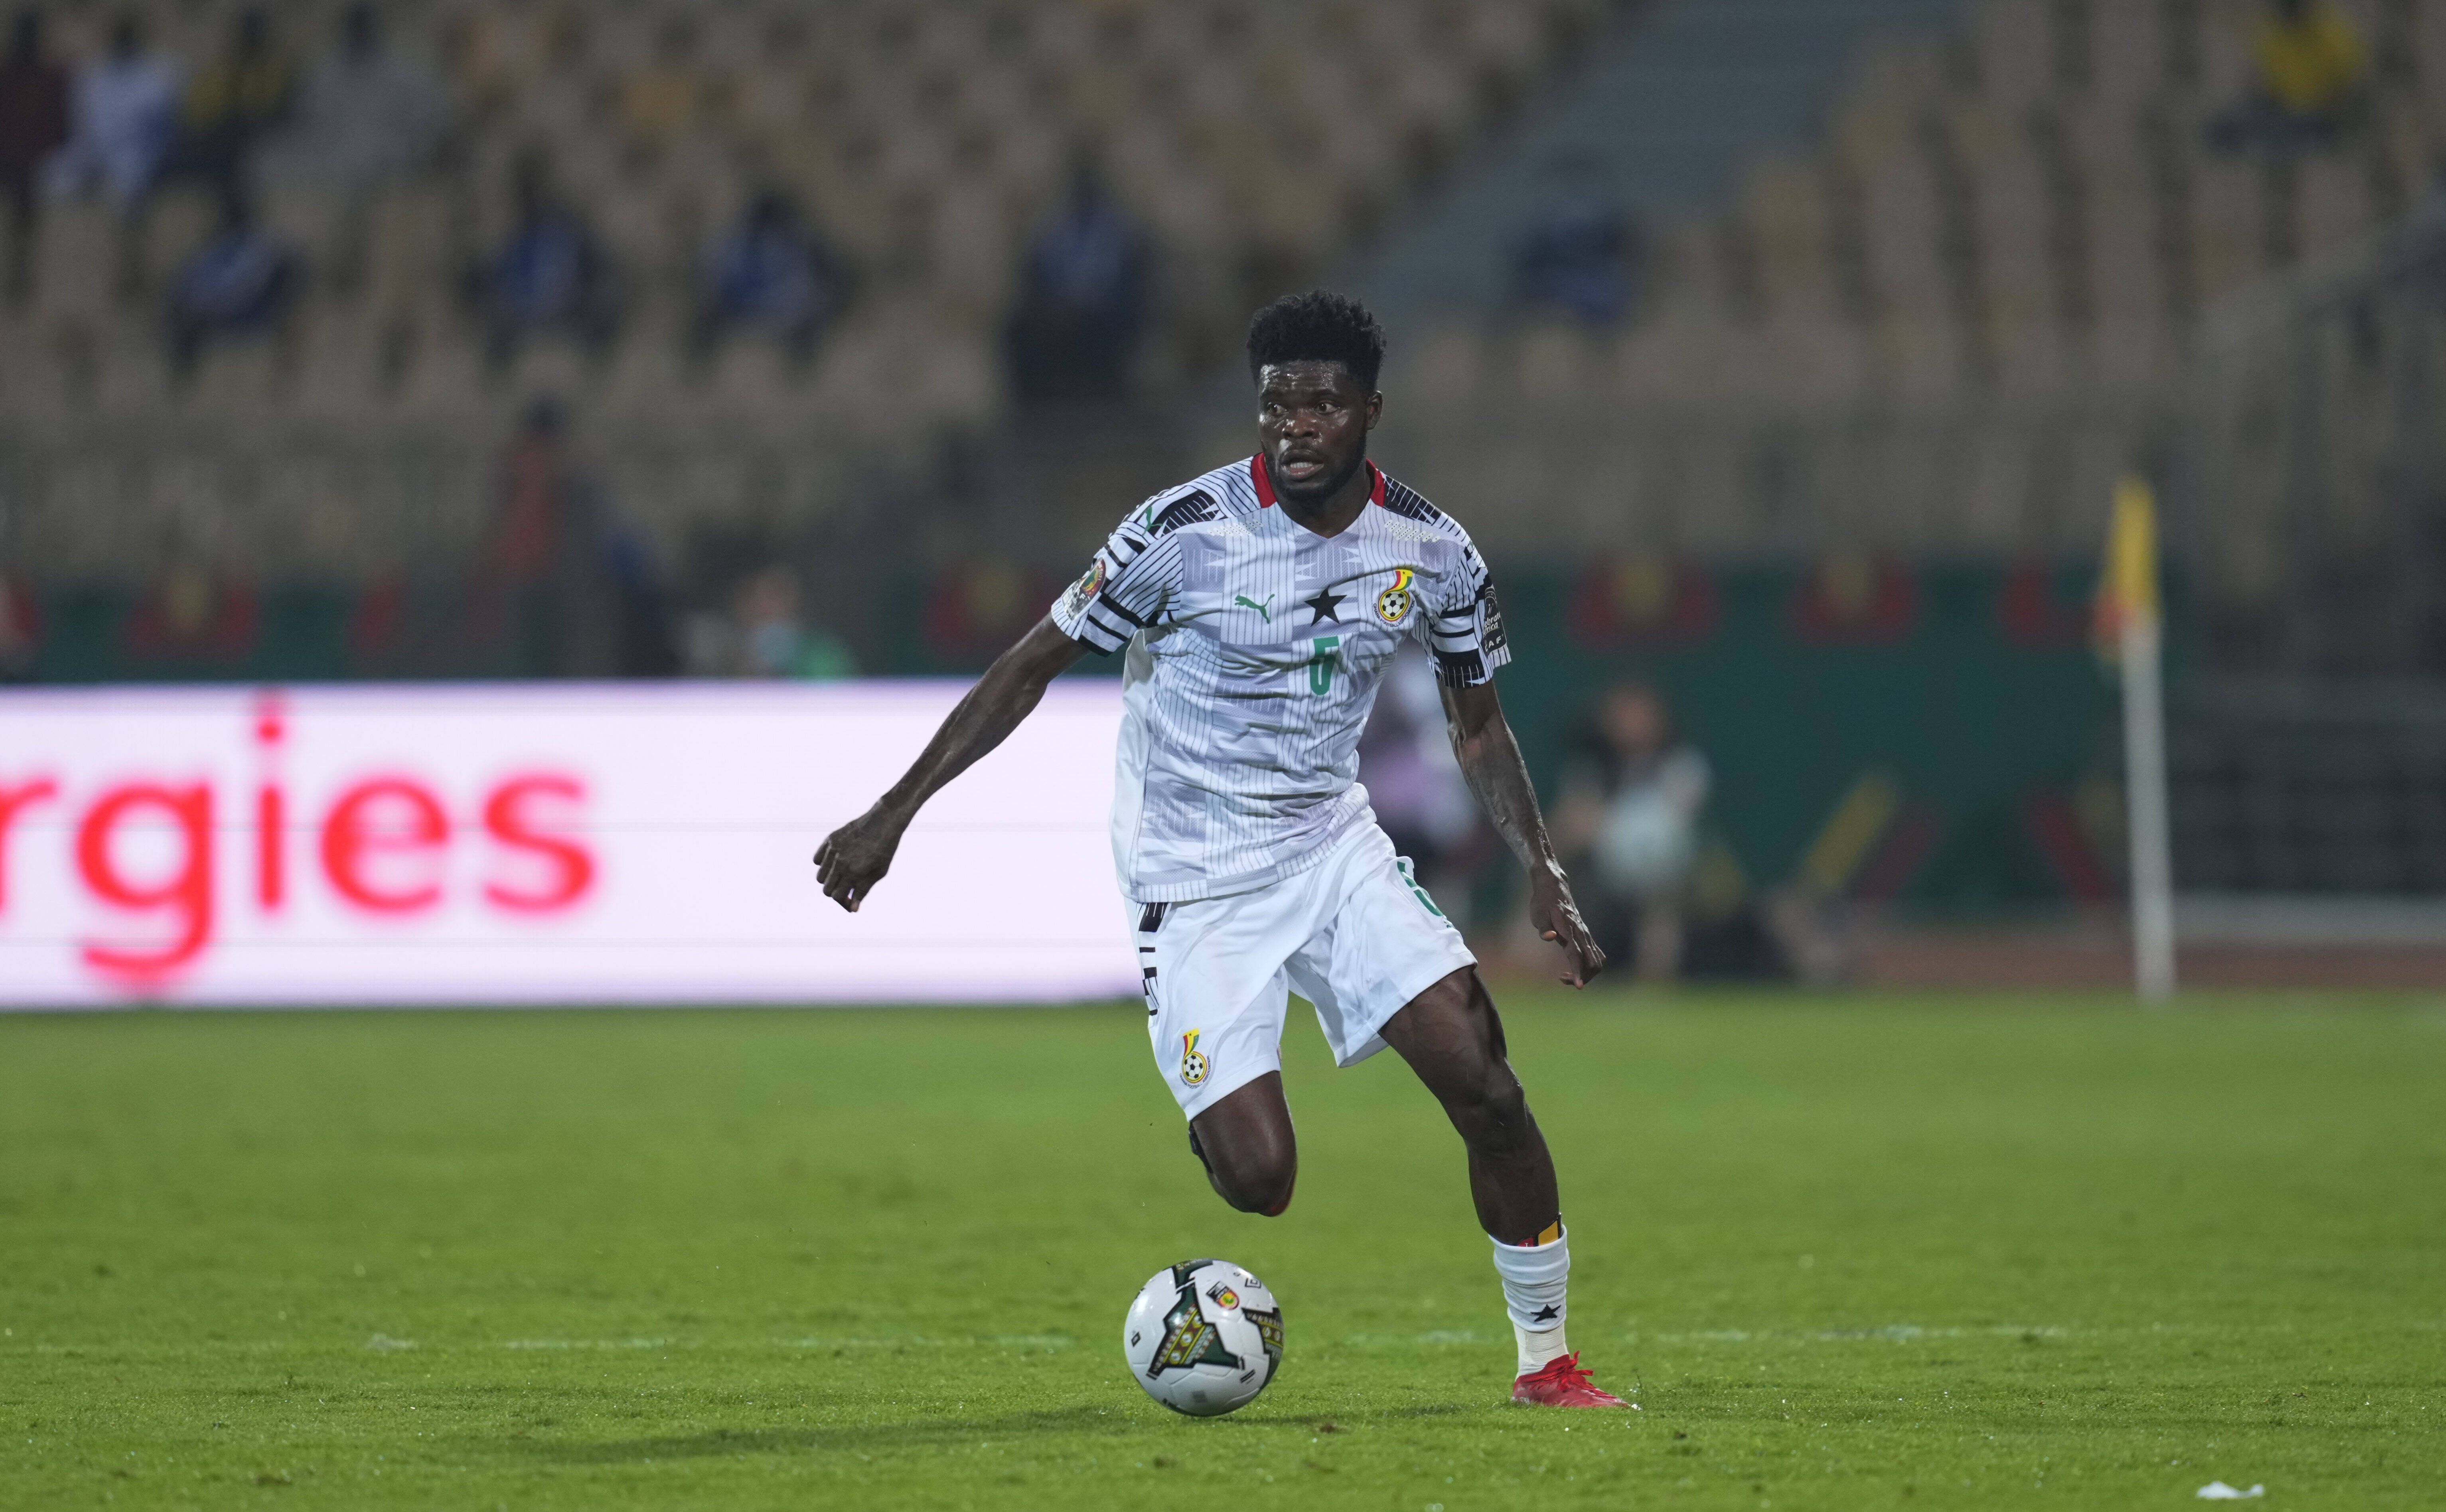 Thomas Partey is a key player for Ghana